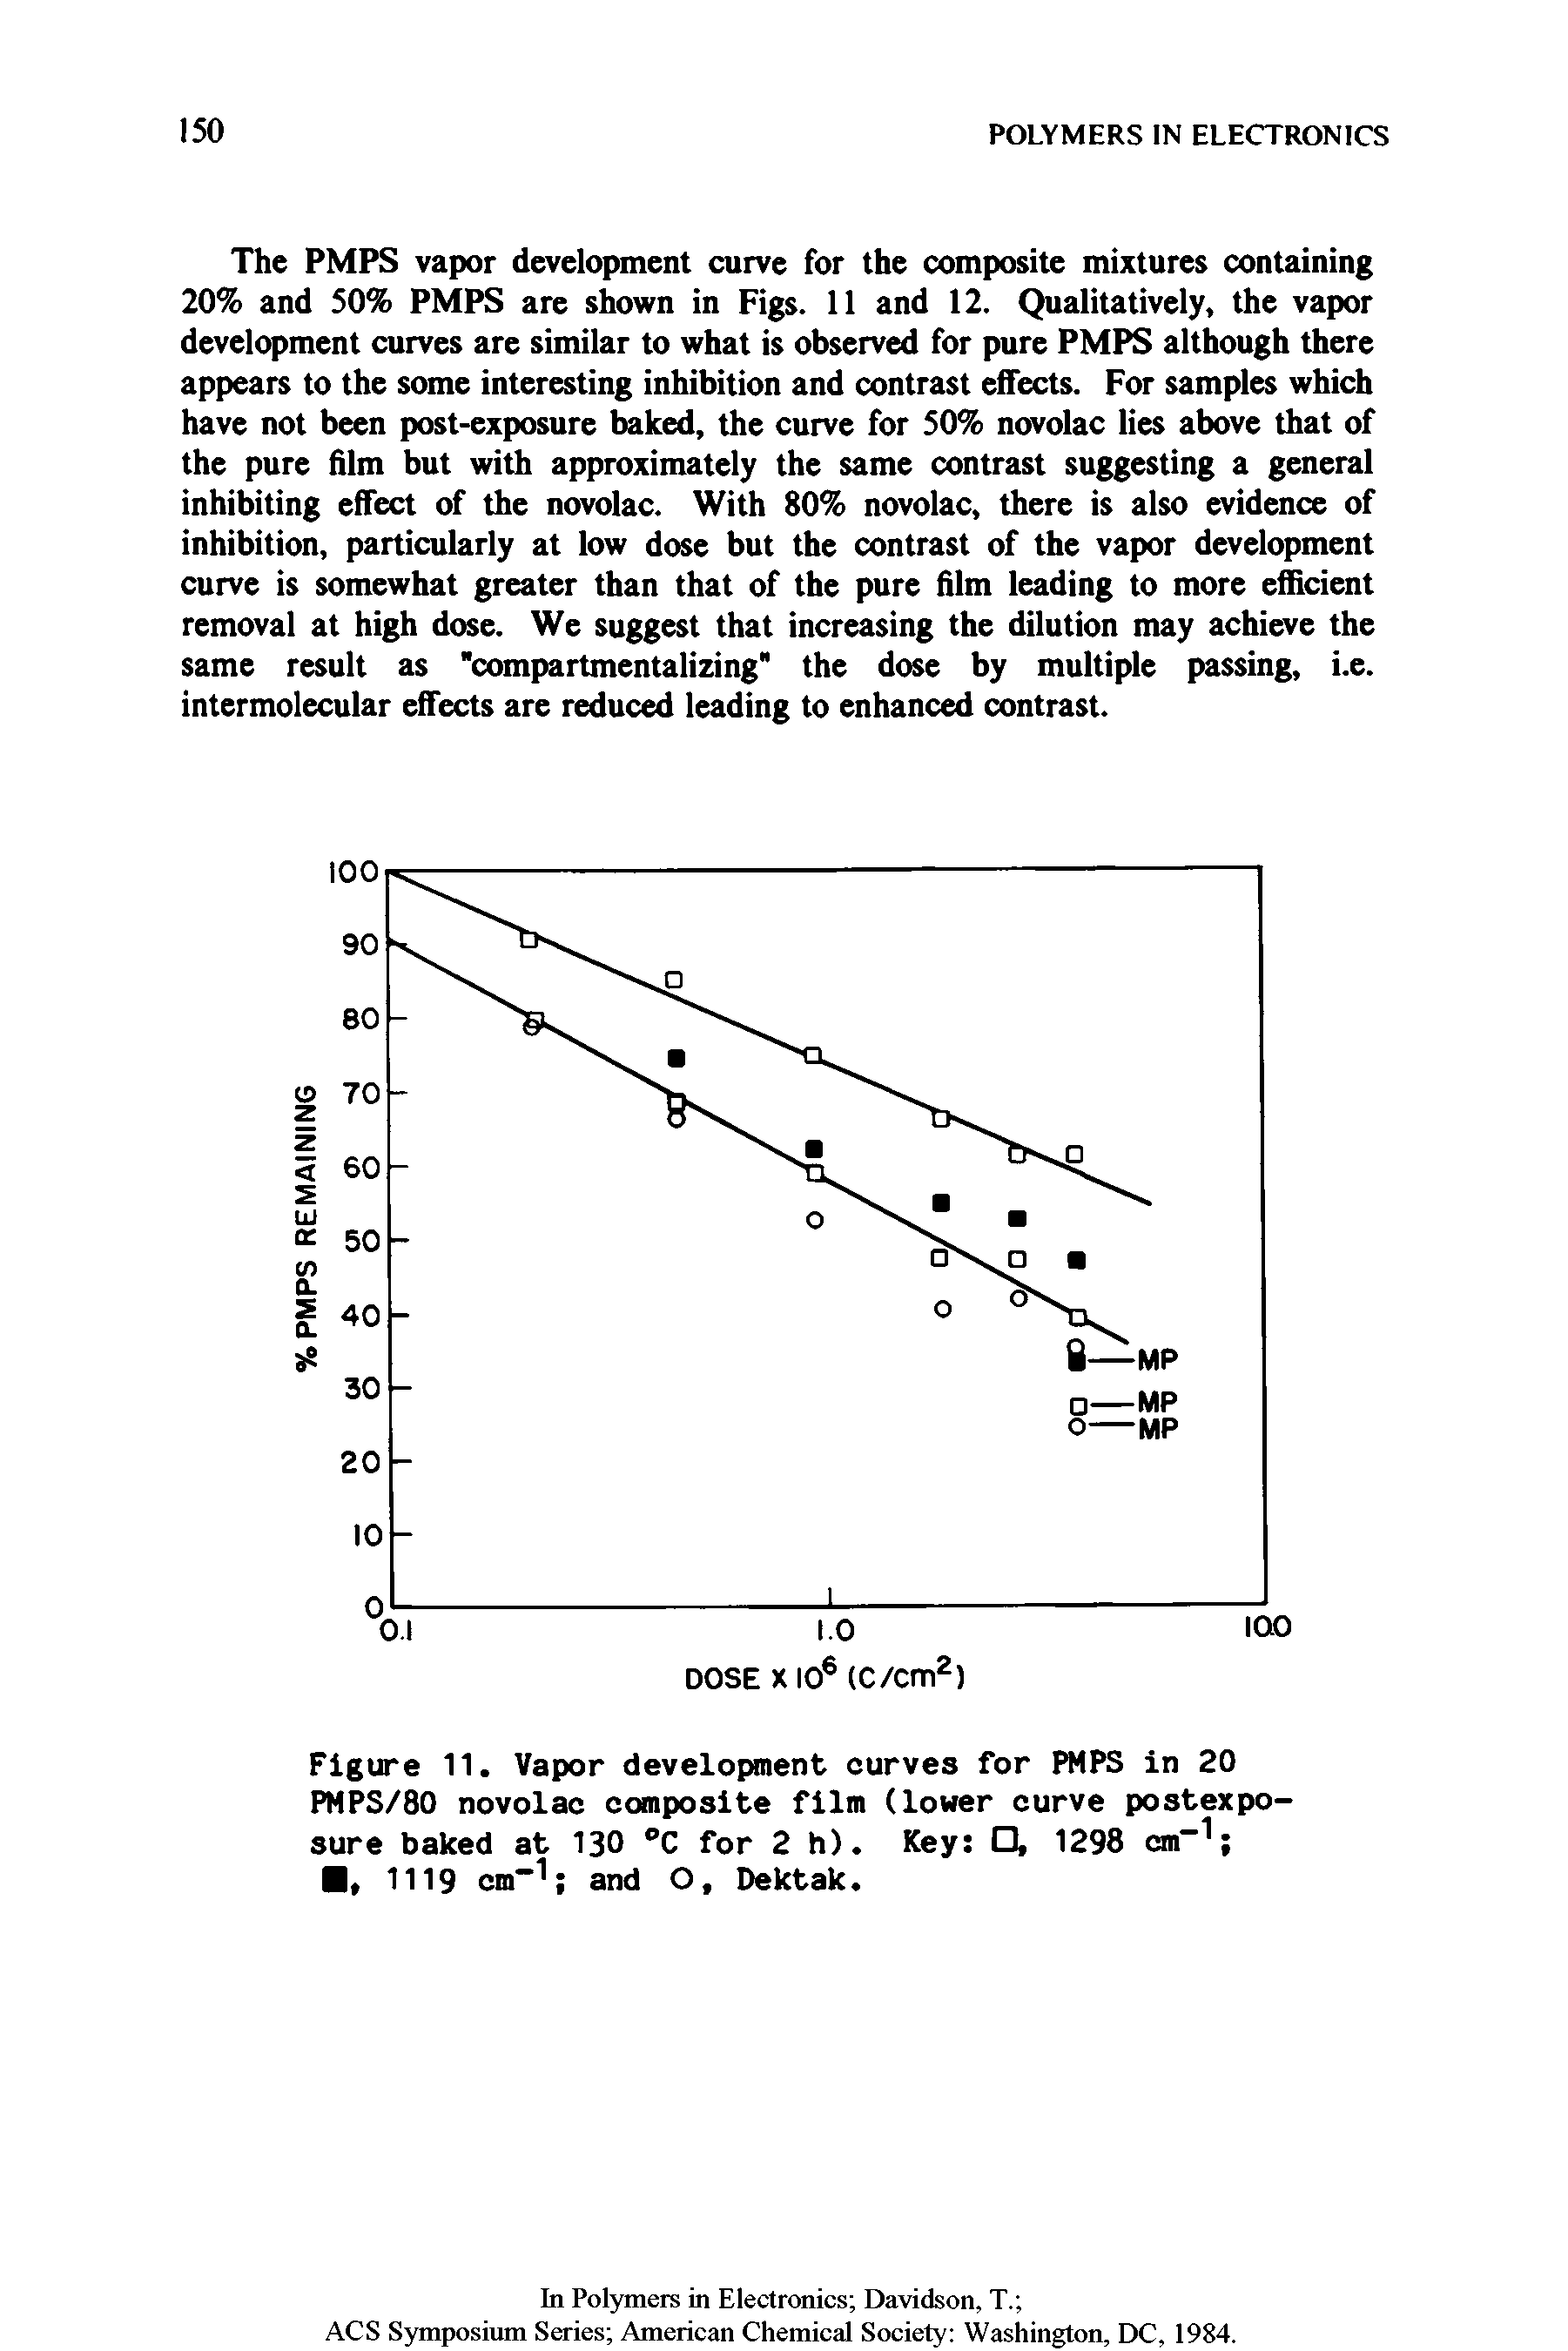 Figure 11. Vapor development curves for PMPS in 20 PMPS/80 novolac composite film (lower curve postexposure baked at 130 °C for 2 h). Key , 1298 cm-1 ...